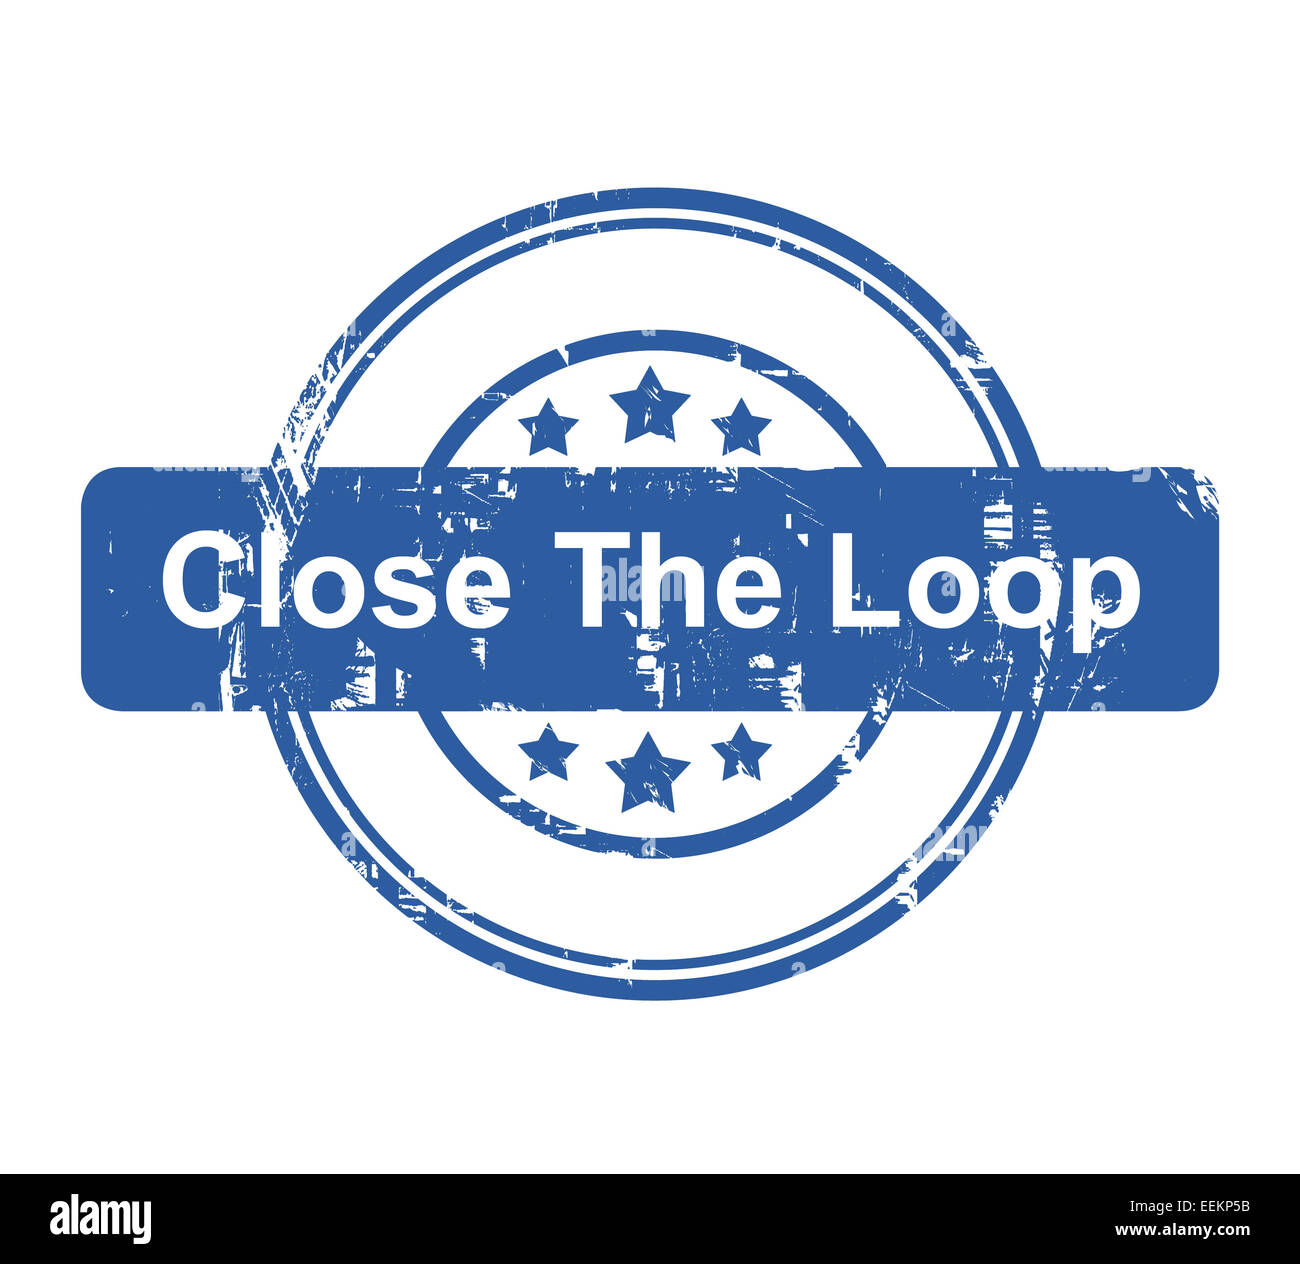 Close the loop business concept stamp with stars isolated on a white background. Stock Photo